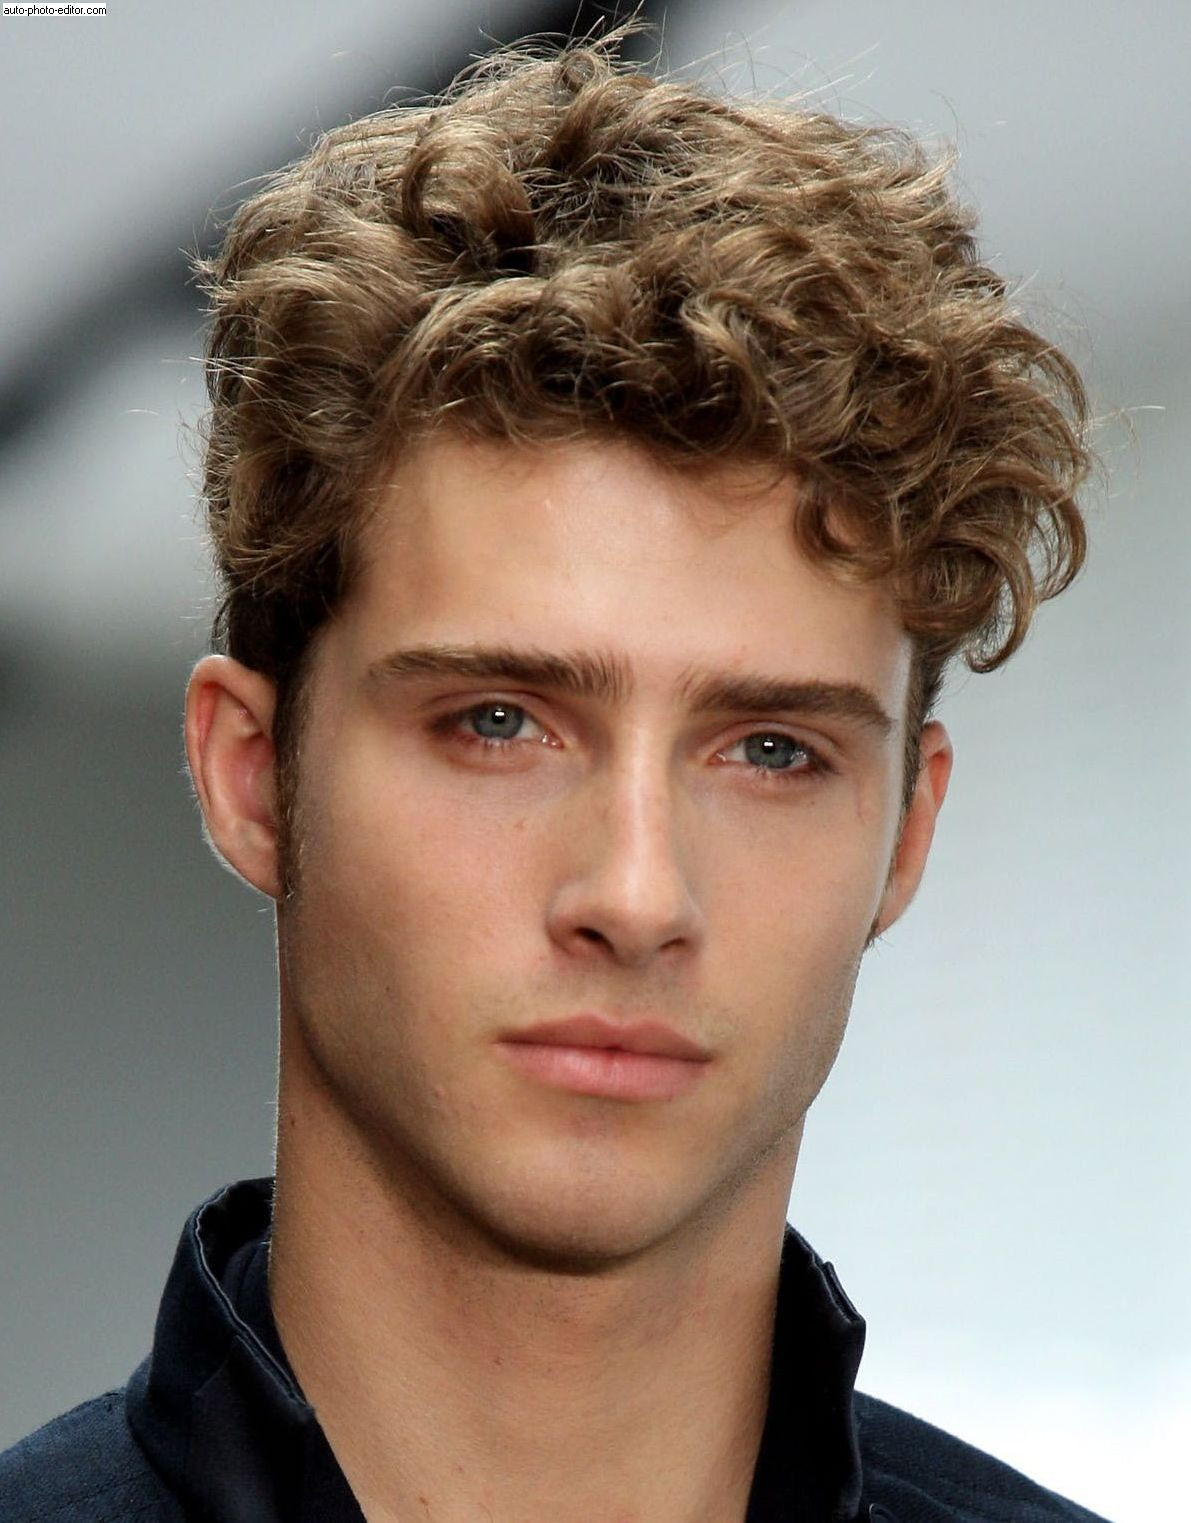 Male Curly Haircuts
 The 45 Best Curly Hairstyles for Men